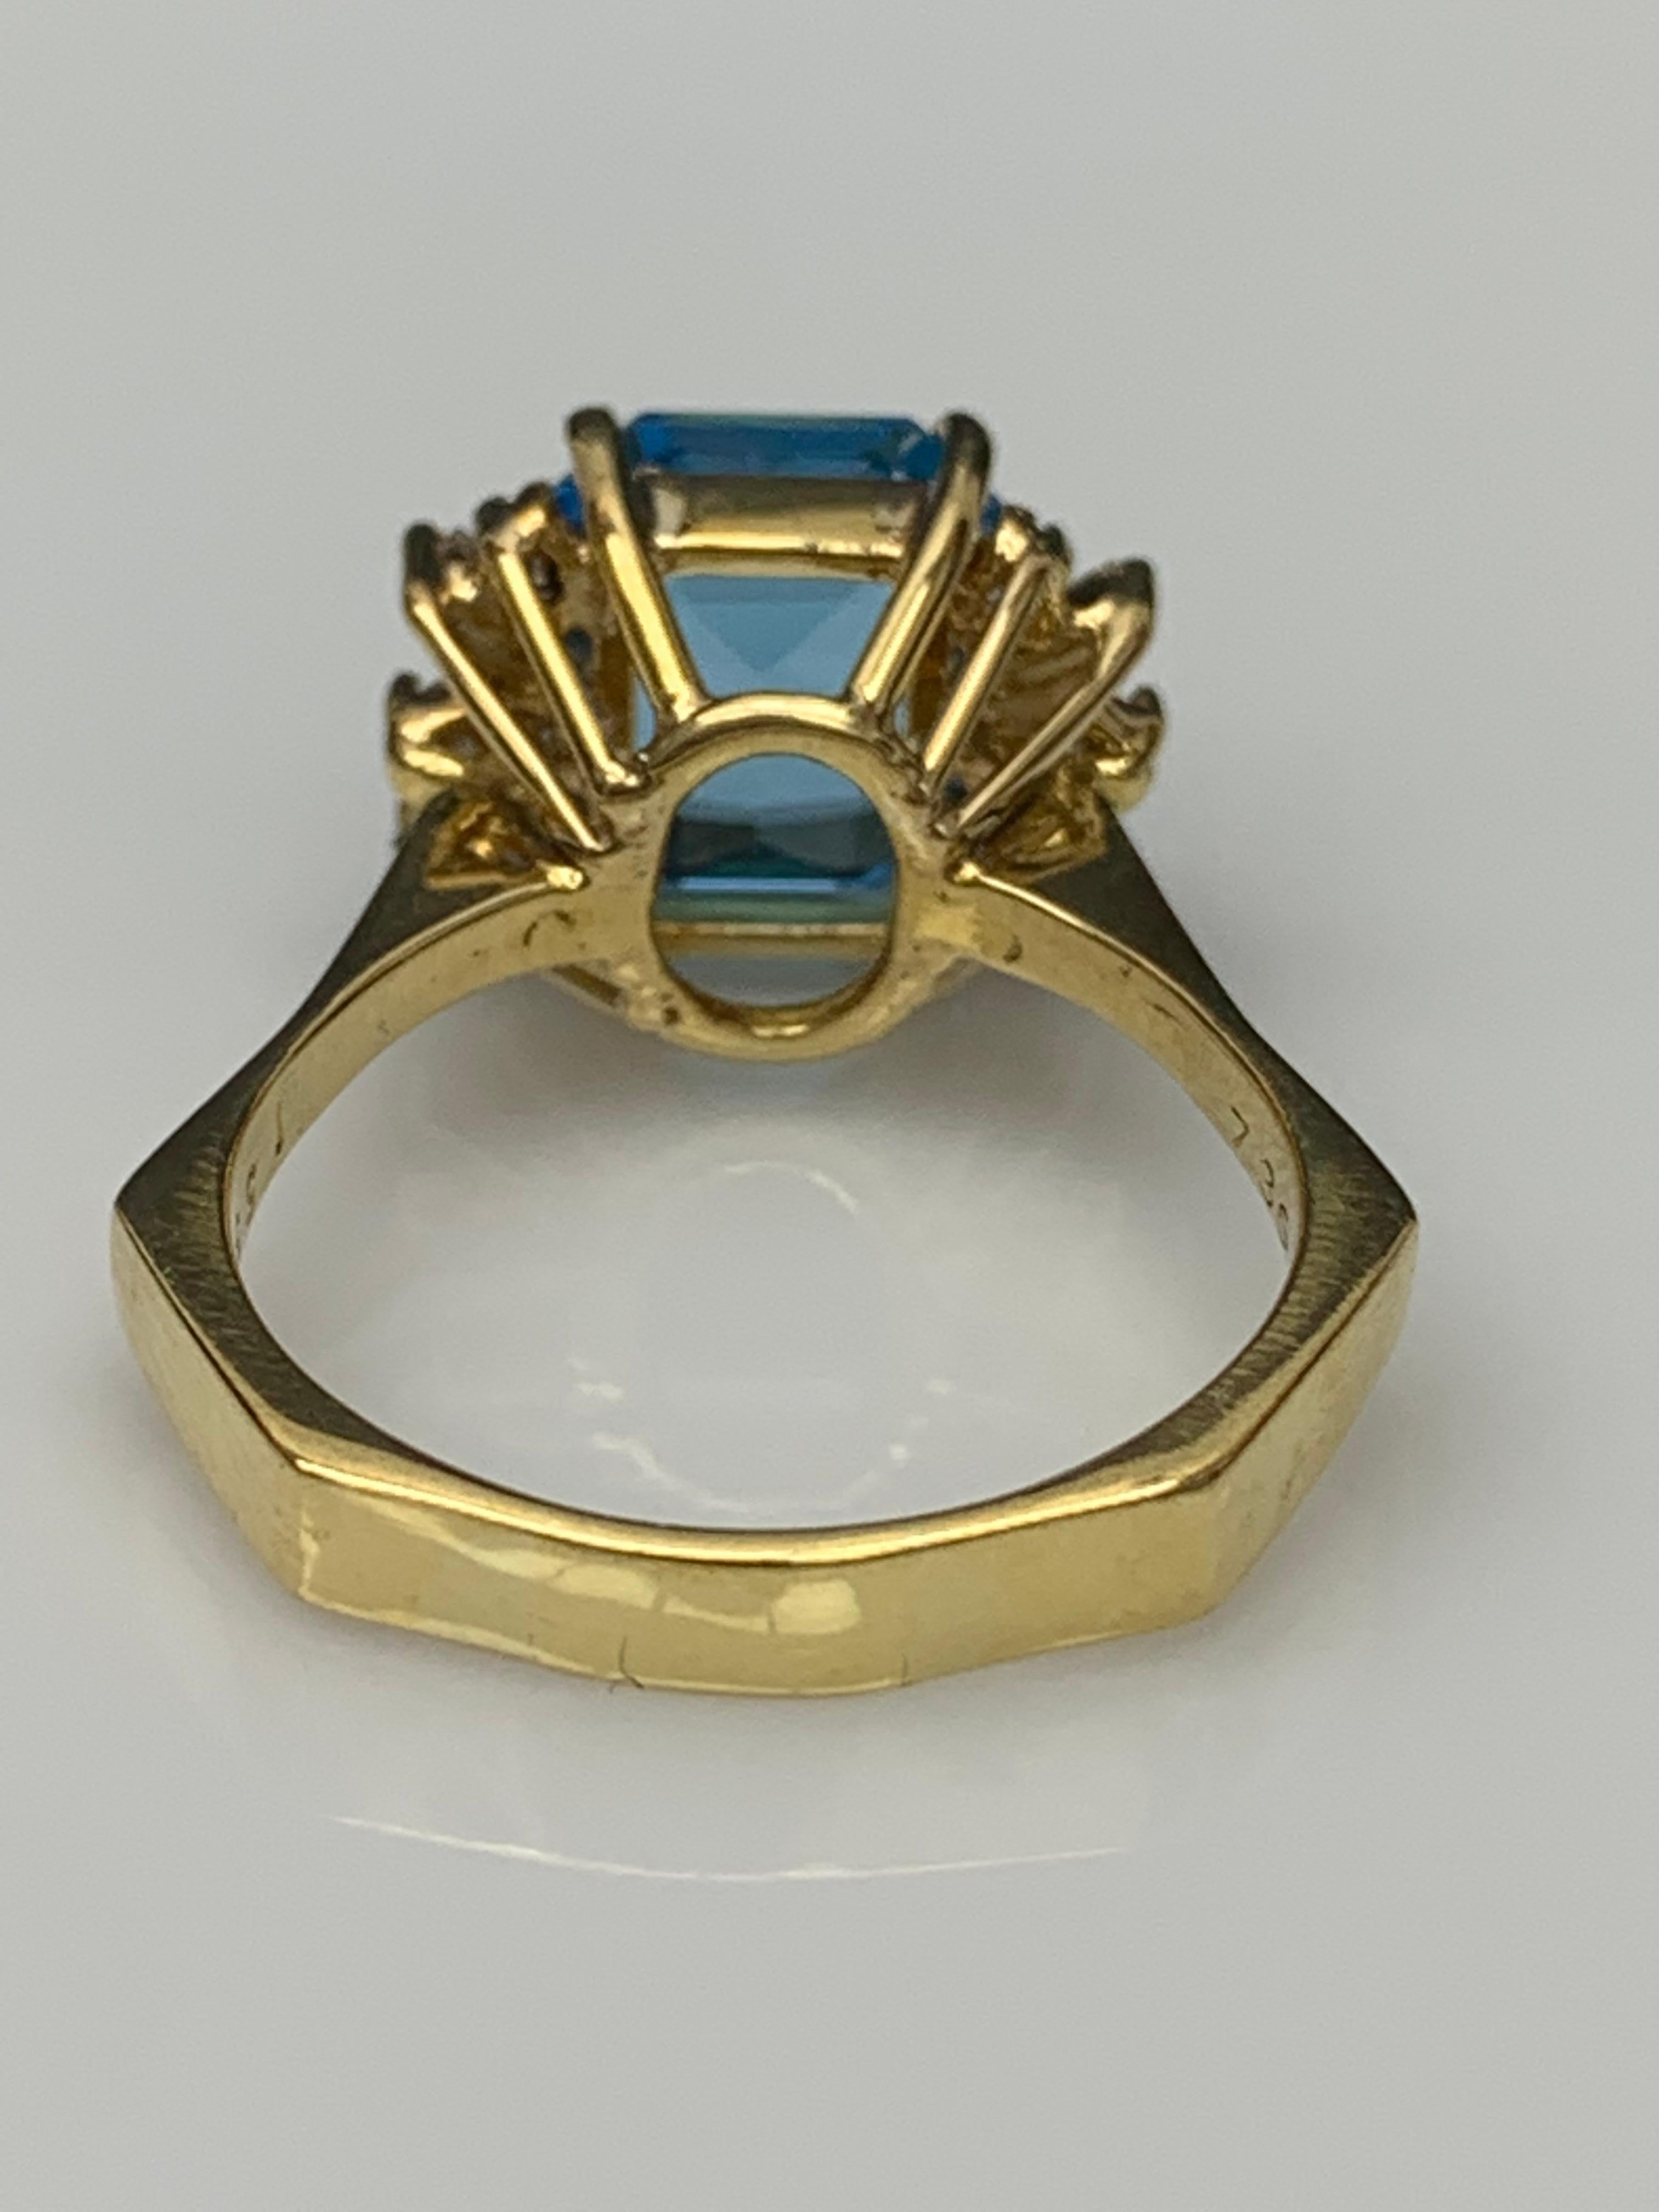 Women's 3.98 Carat Emerald Cut Blue Topaz and Diamond Ring in 14K Yellow Gold For Sale